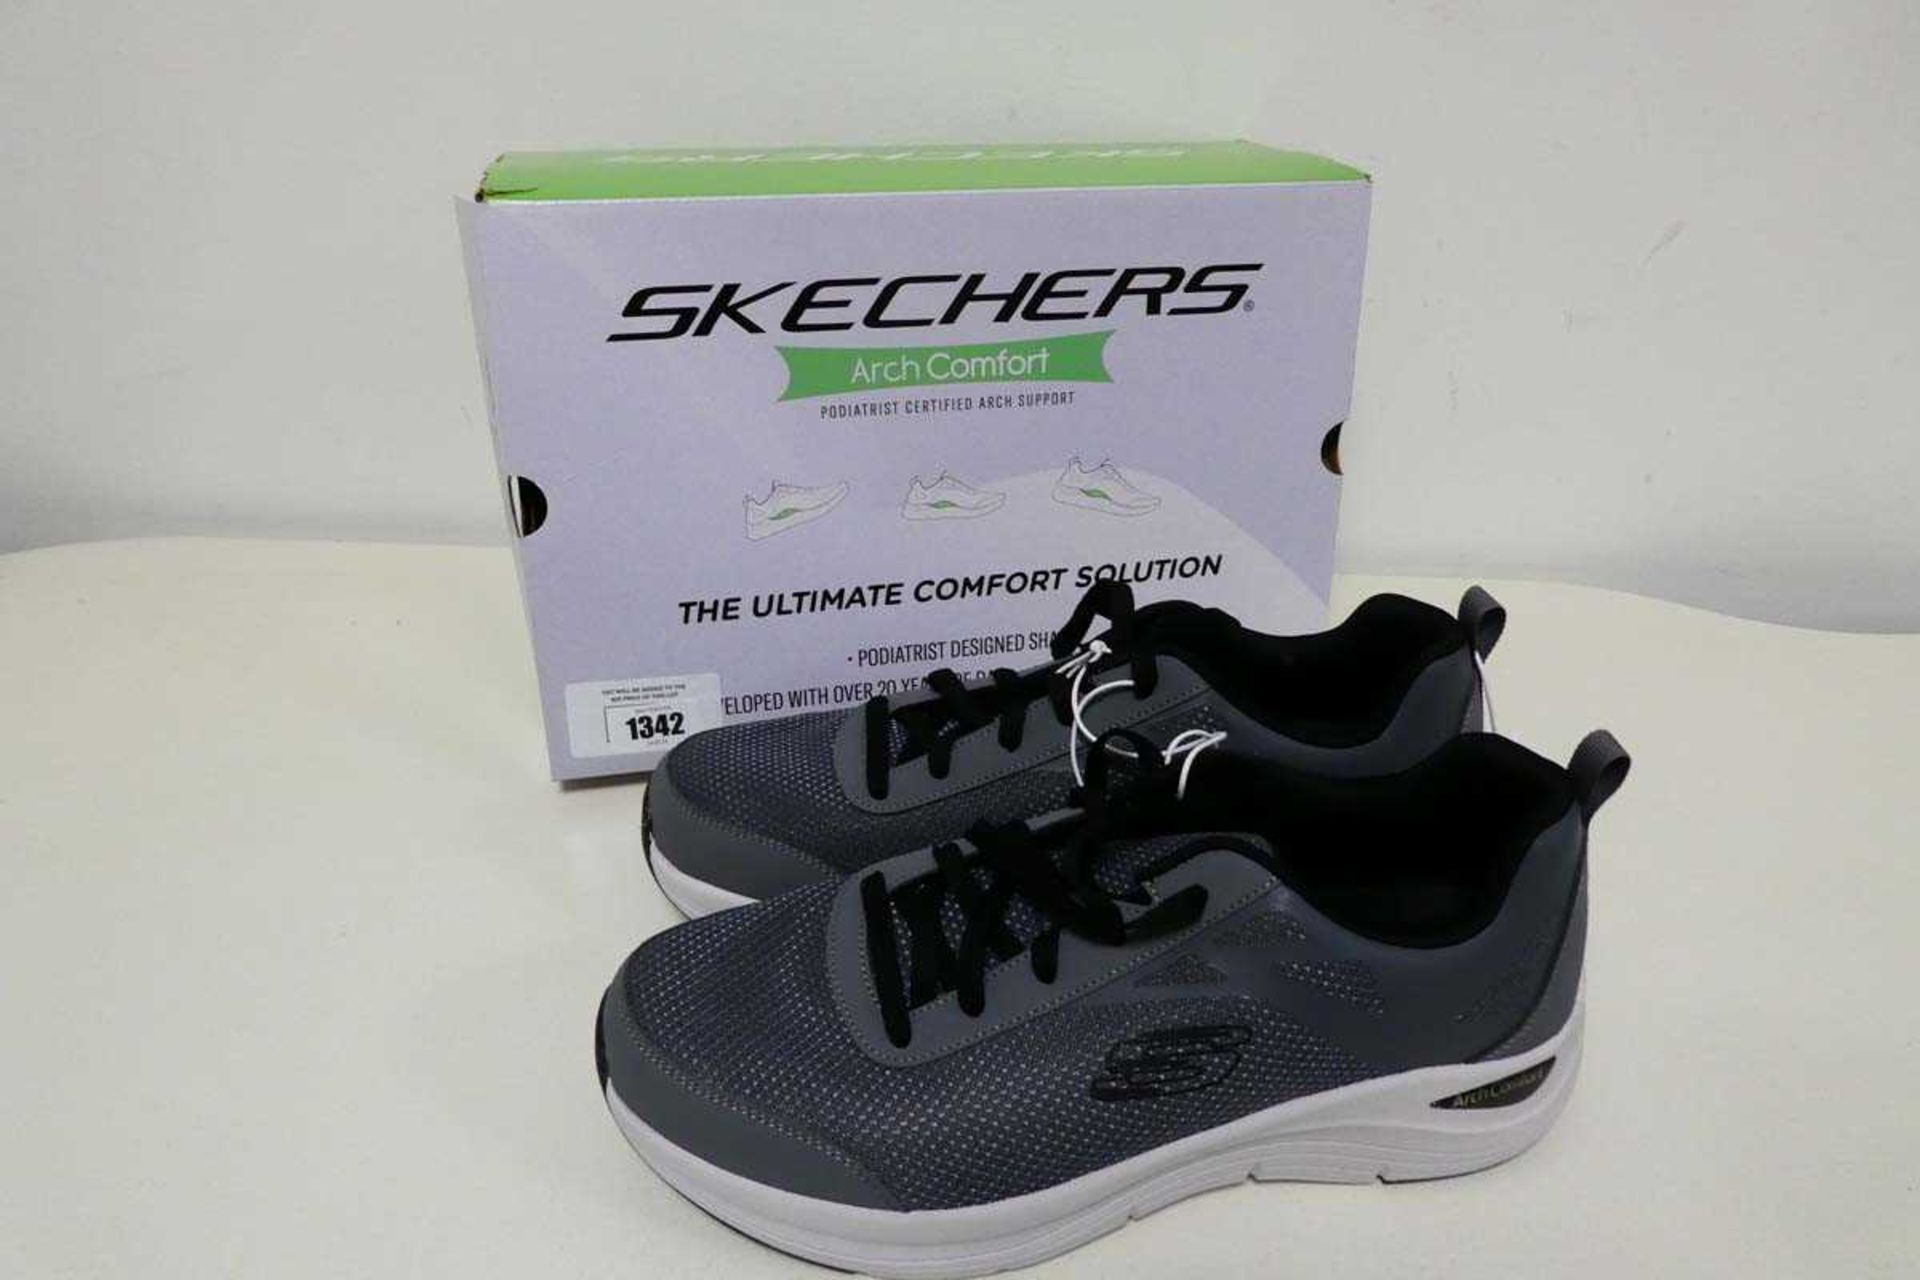 +VAT Boxed pair of men's Skechers arch comfort trainers in grey size 12